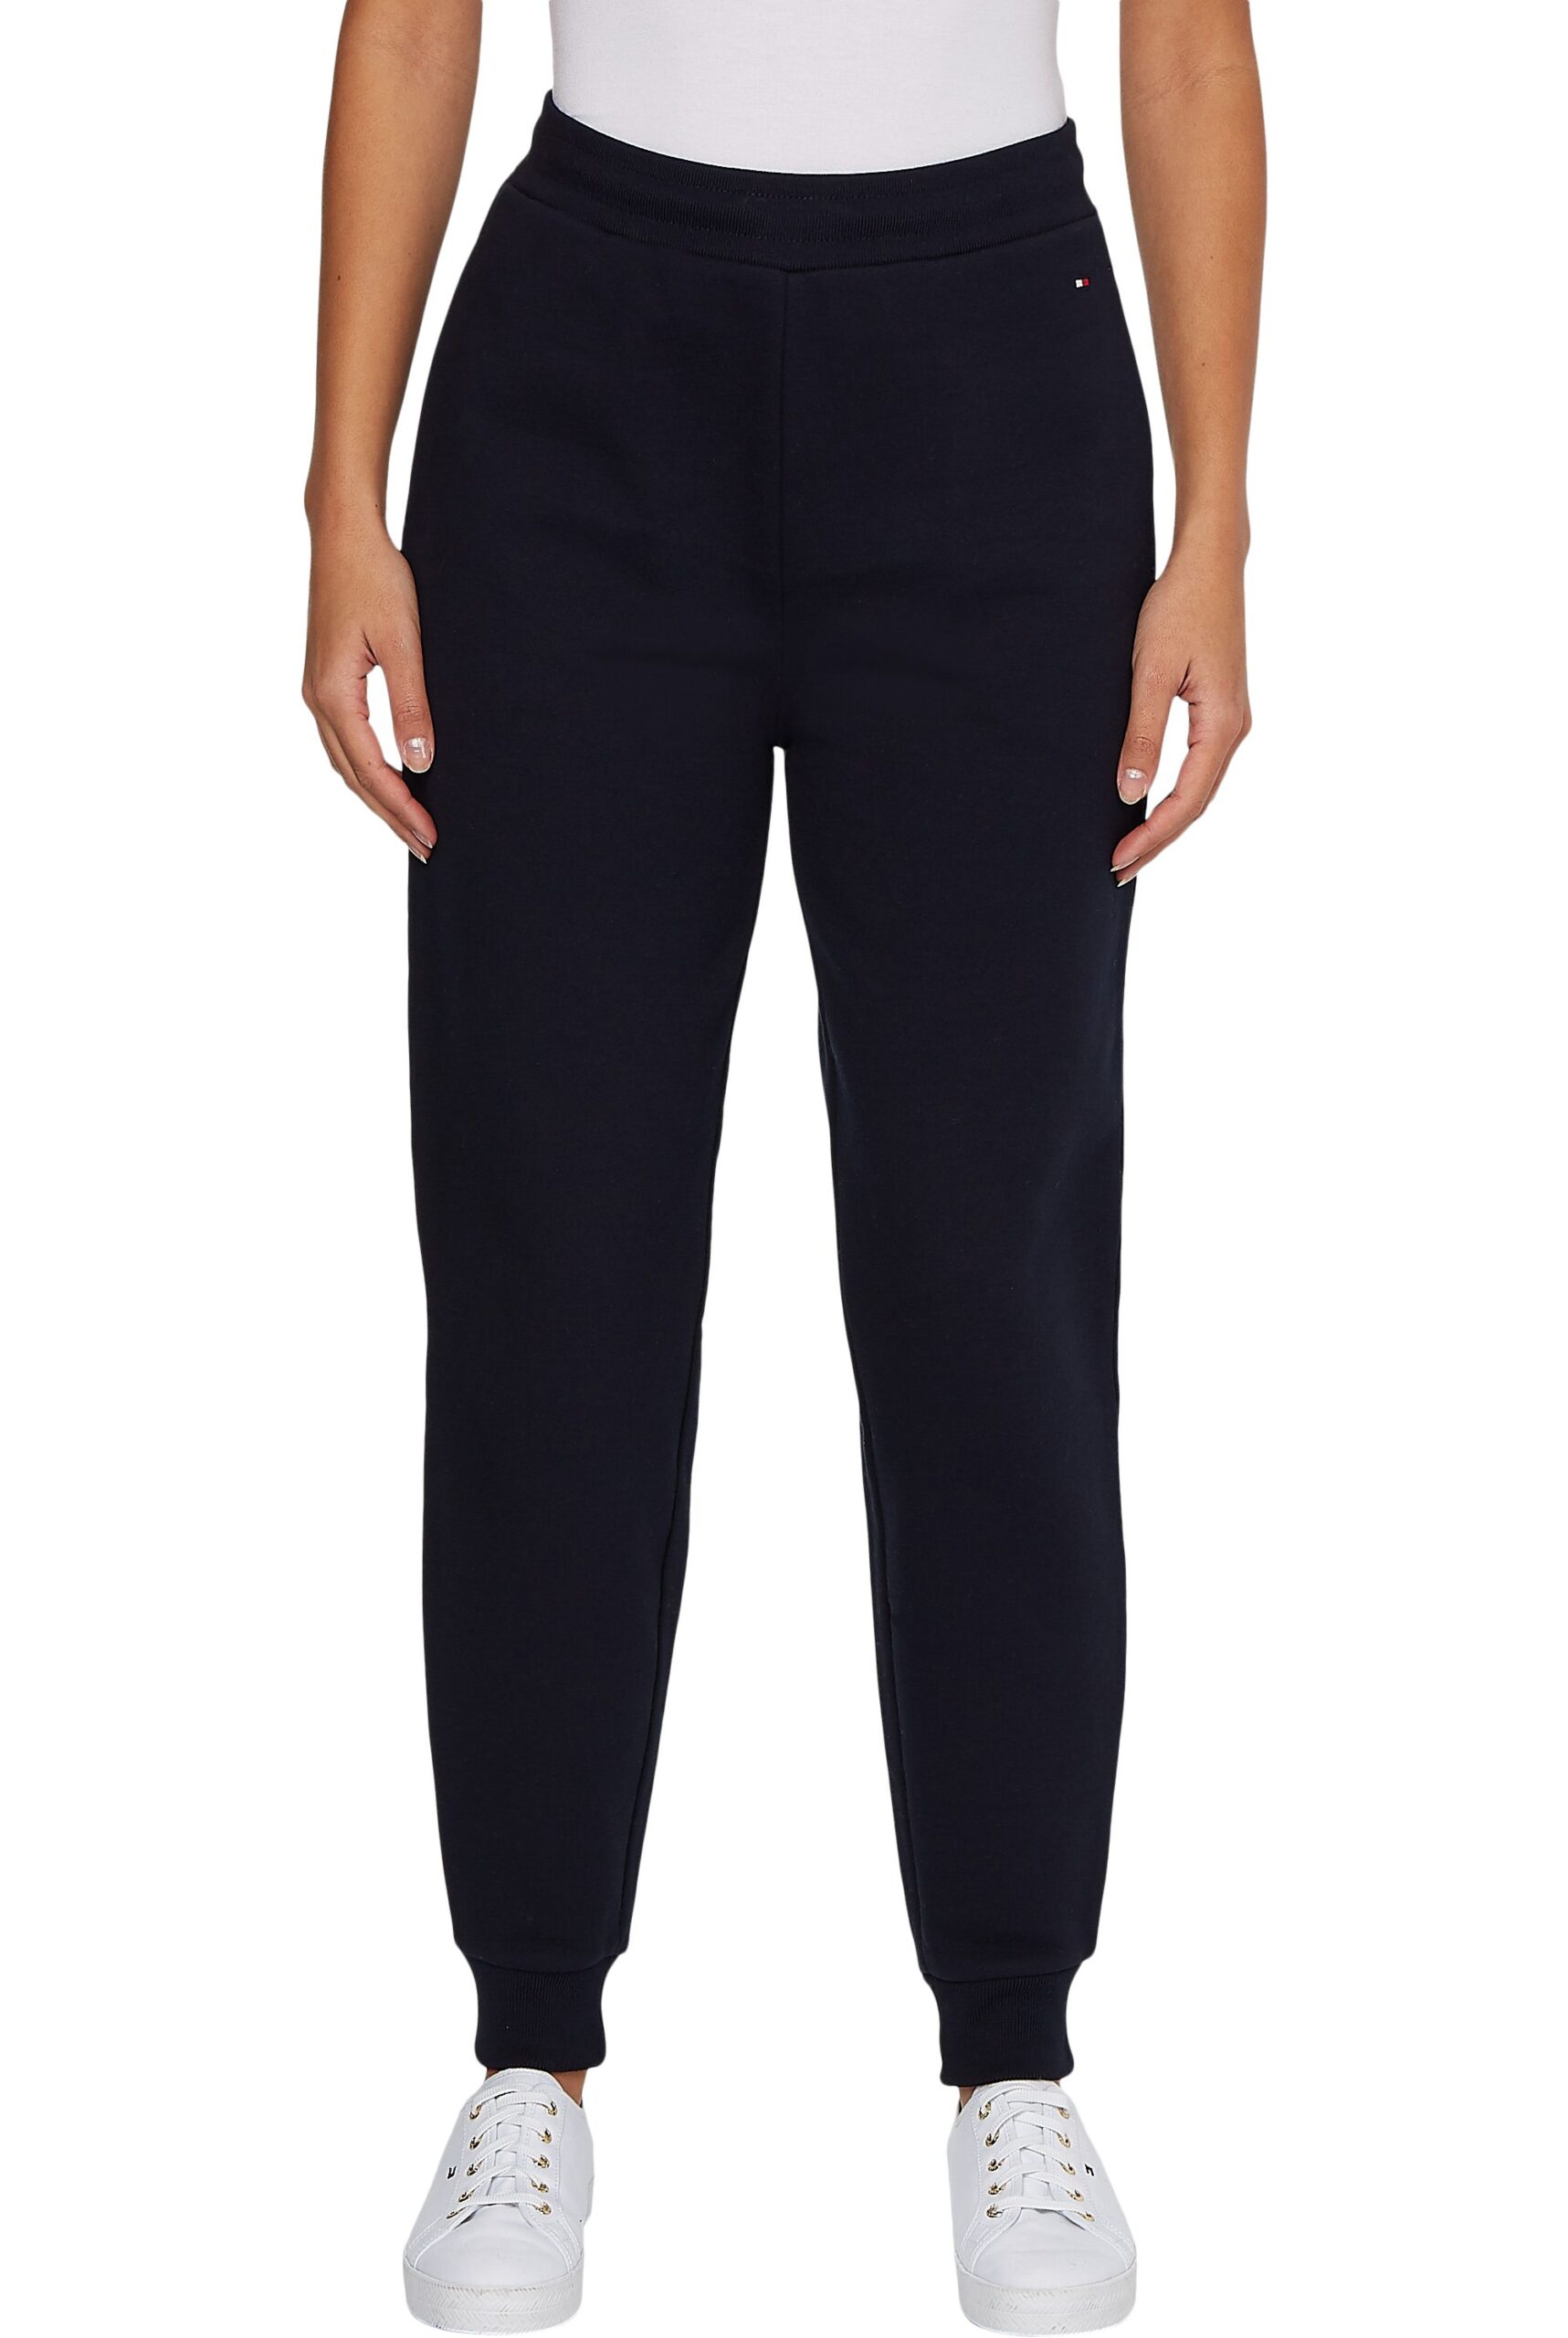 Tommy Hilfiger Relaxed Sweatpants